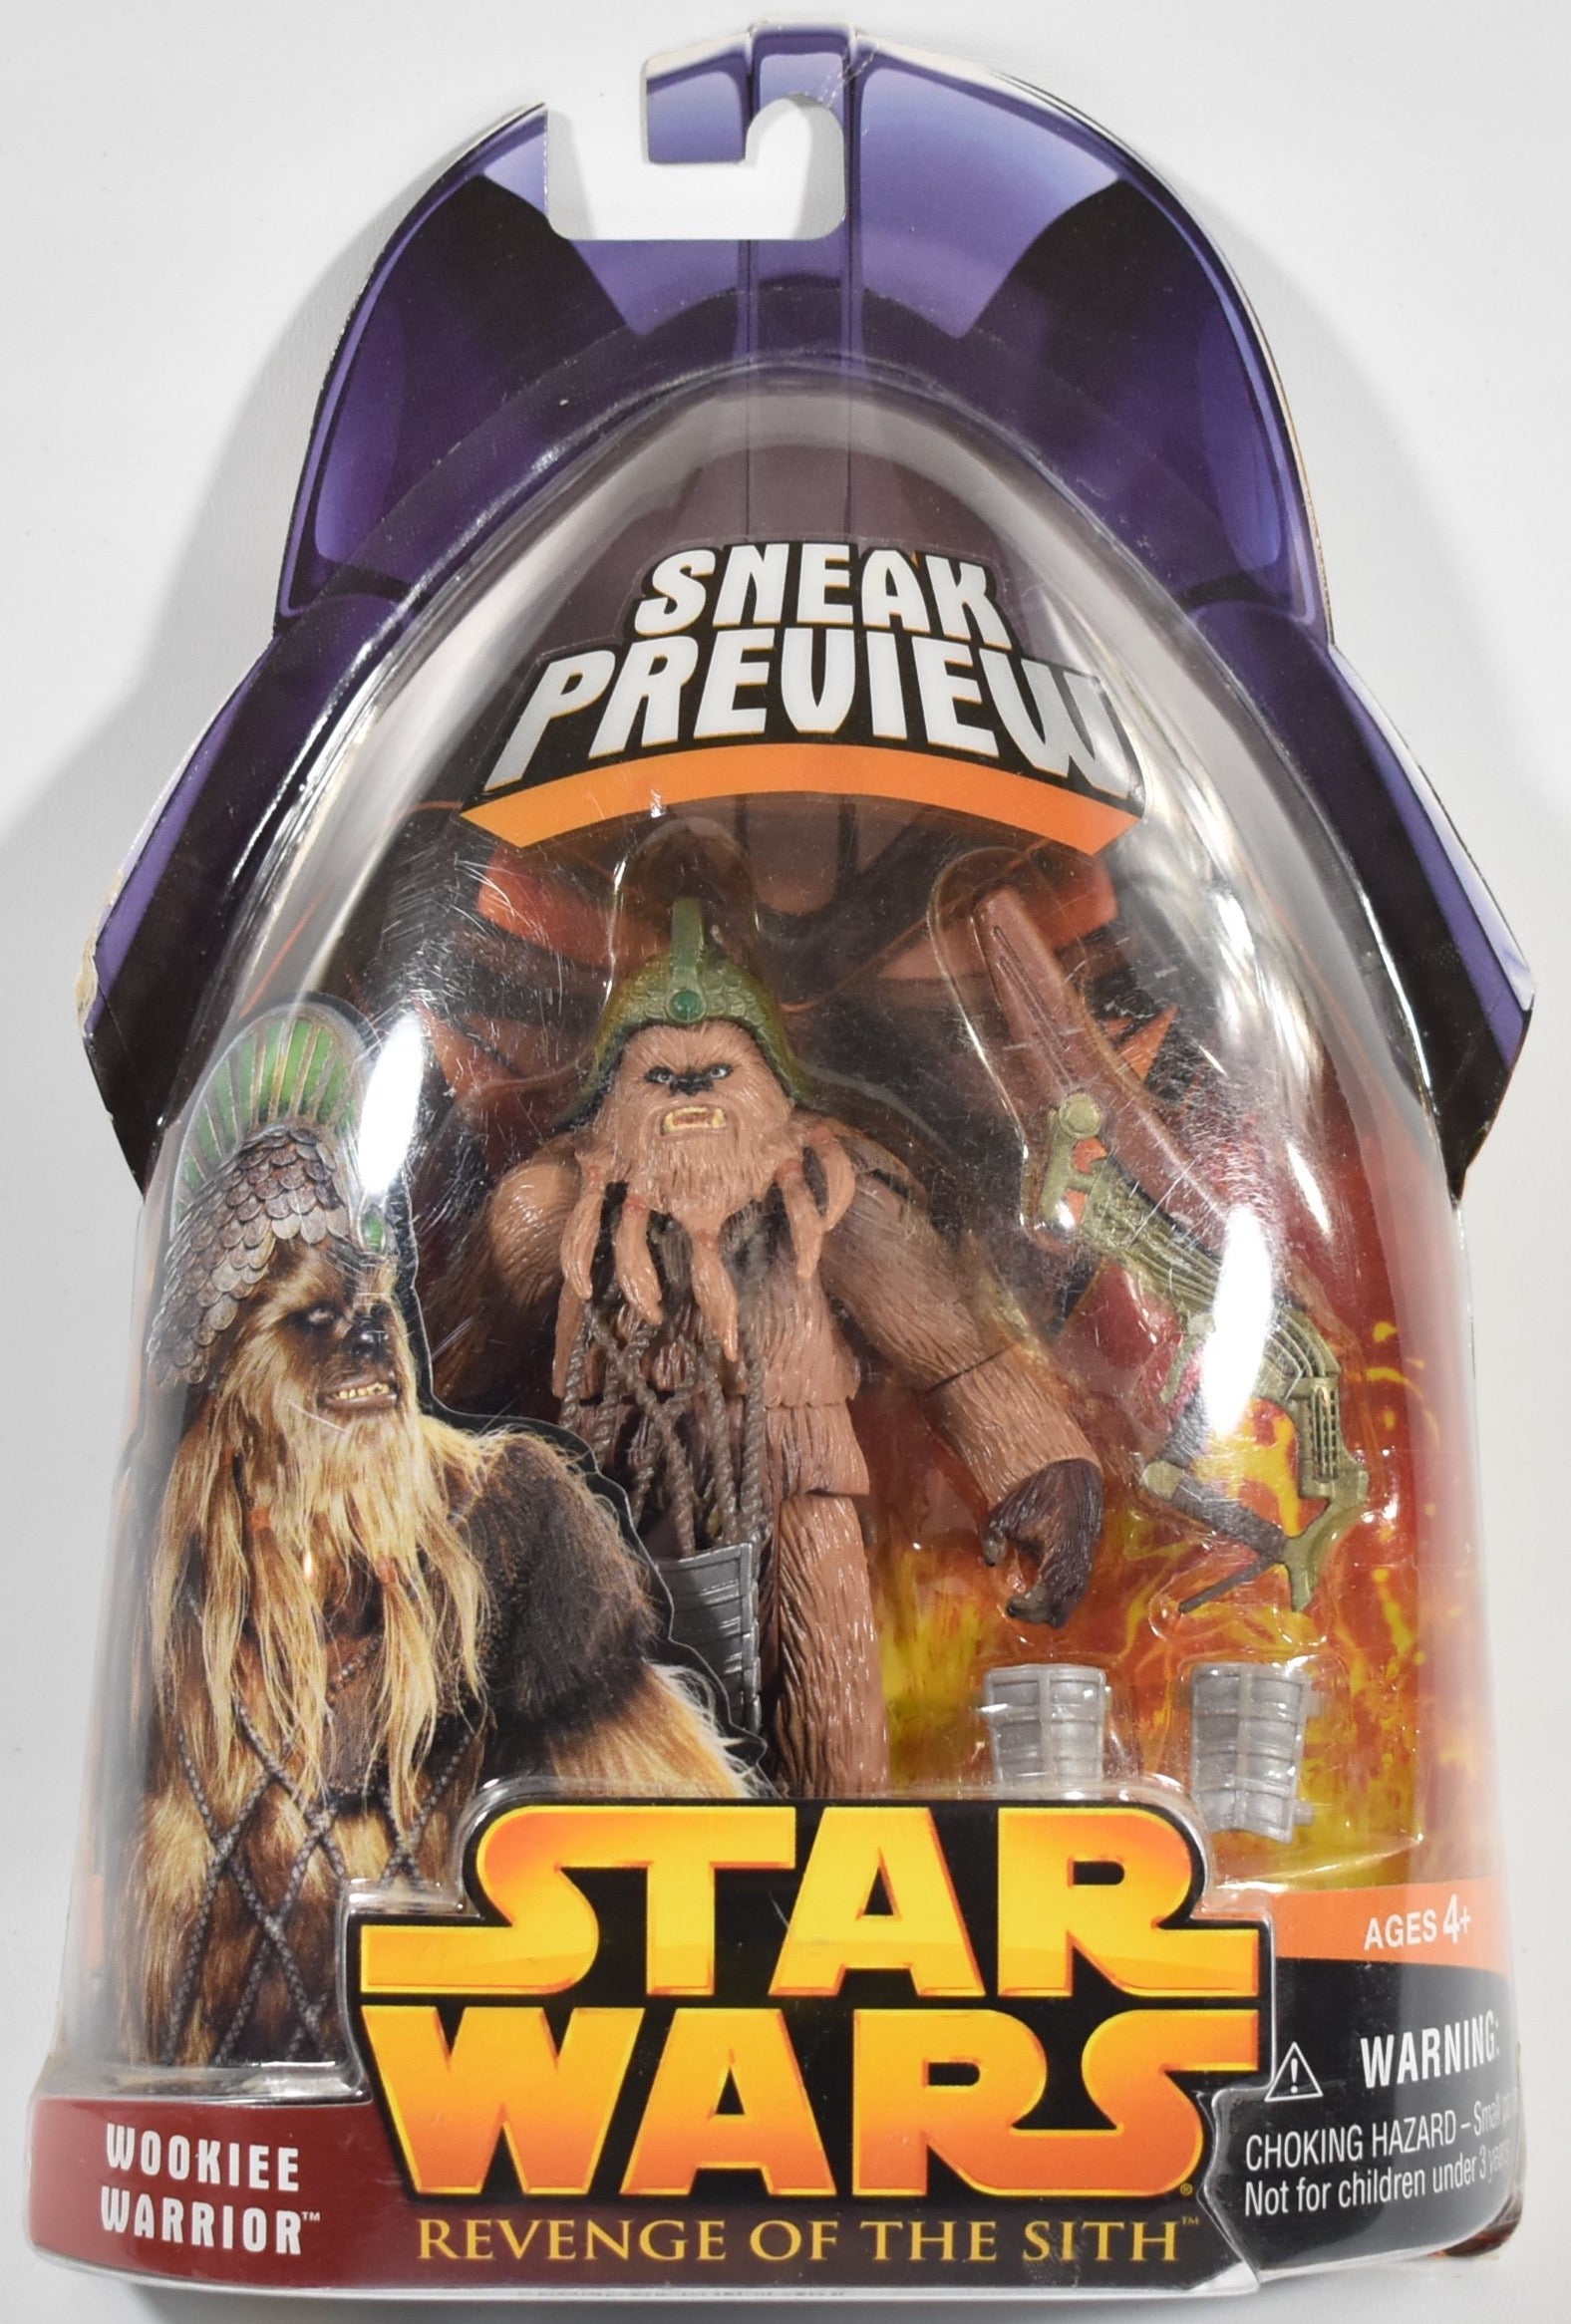 Revenge of the Sith Sneak Preview Action Figure Wookiee Warrior